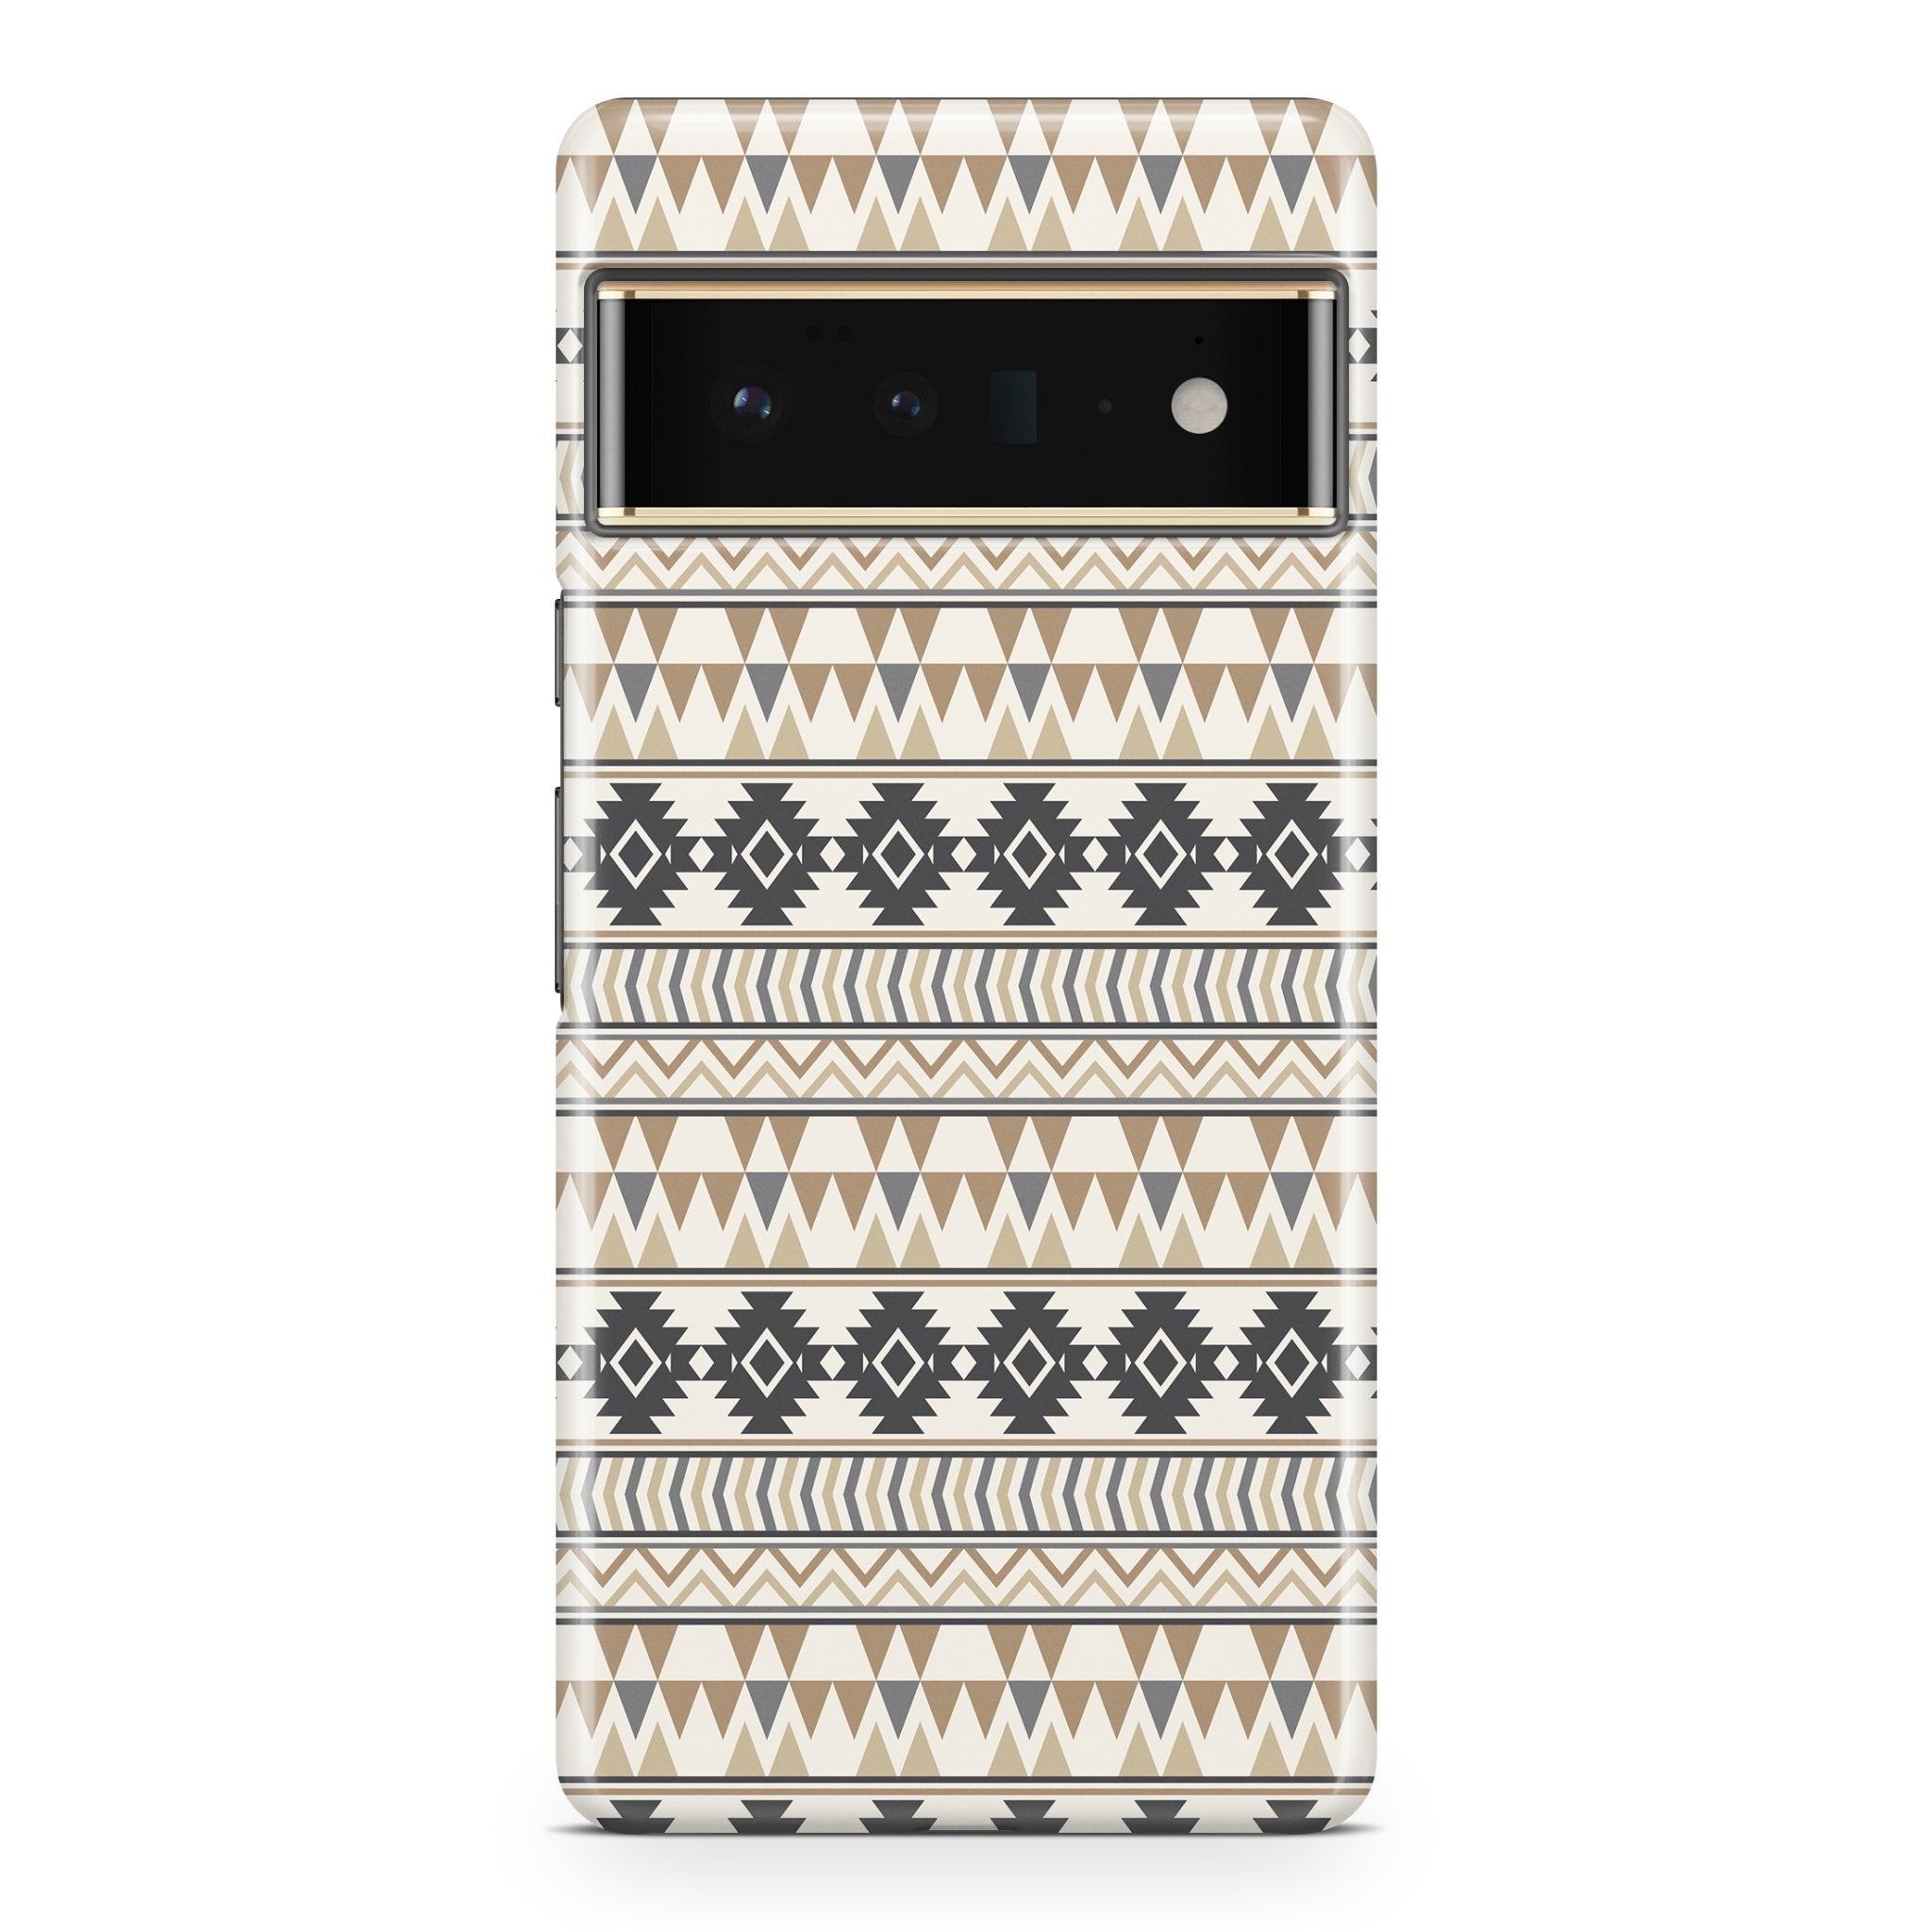 Neutral Aztec - Google phone case designs by CaseSwagger